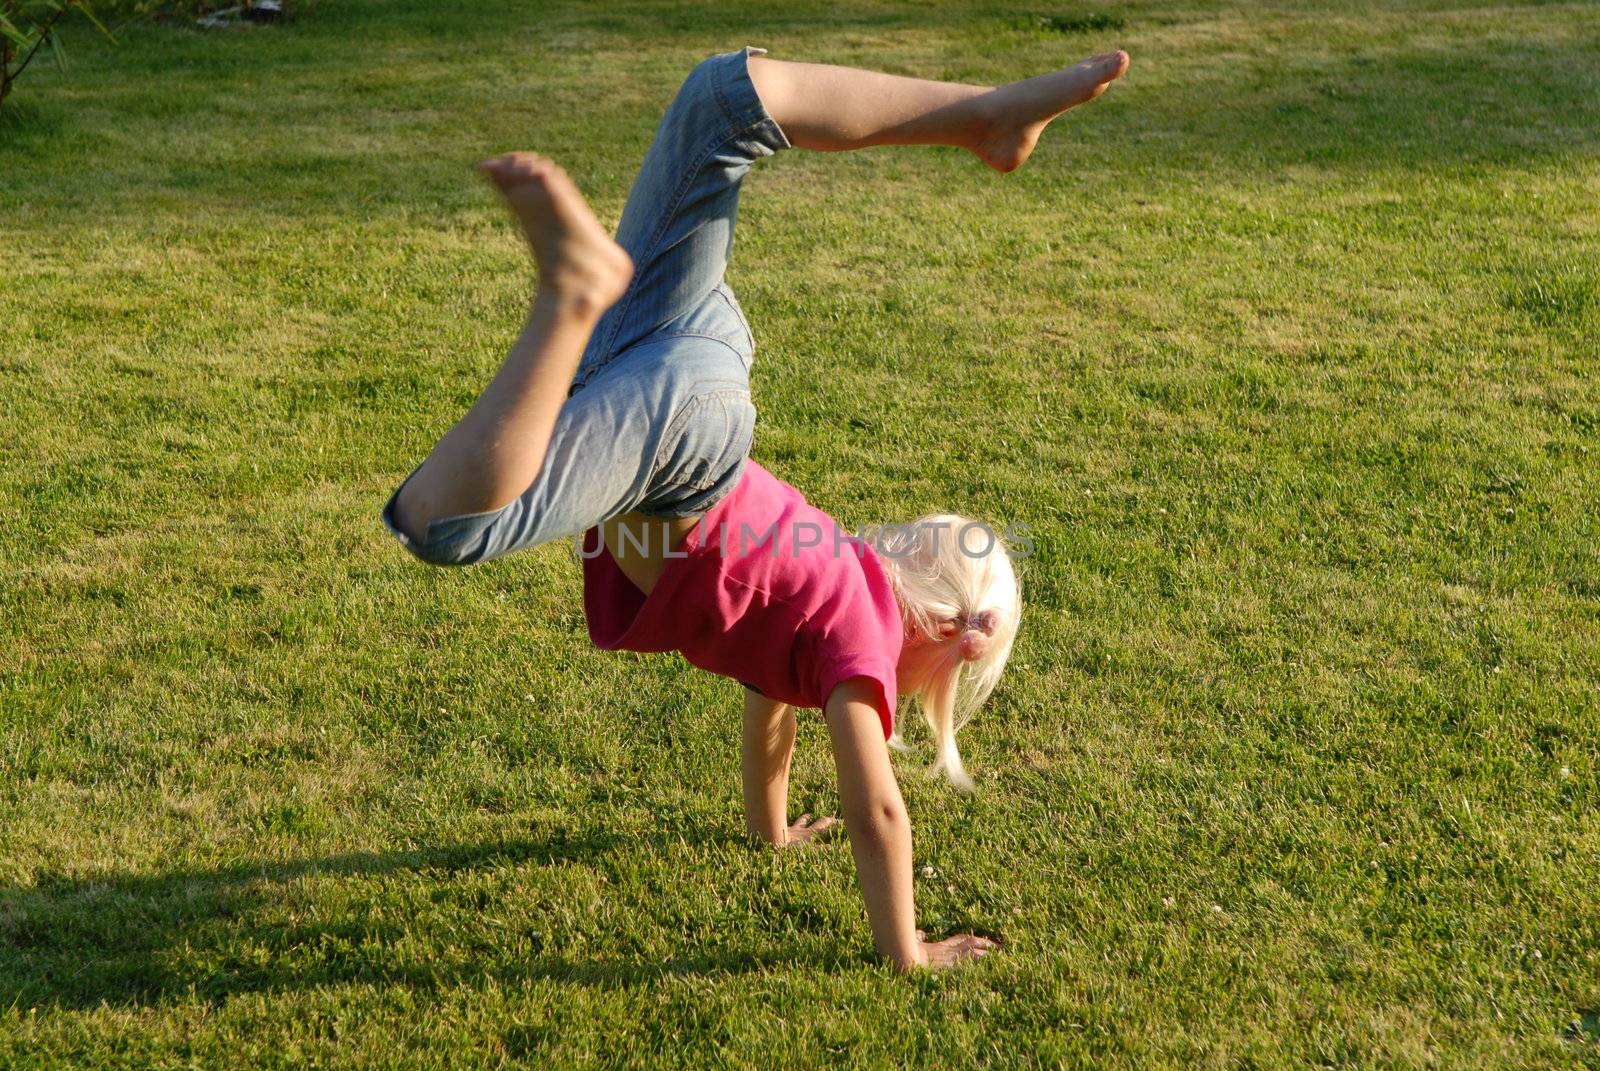 Handstand in the garden. Please note: No negative use allowed